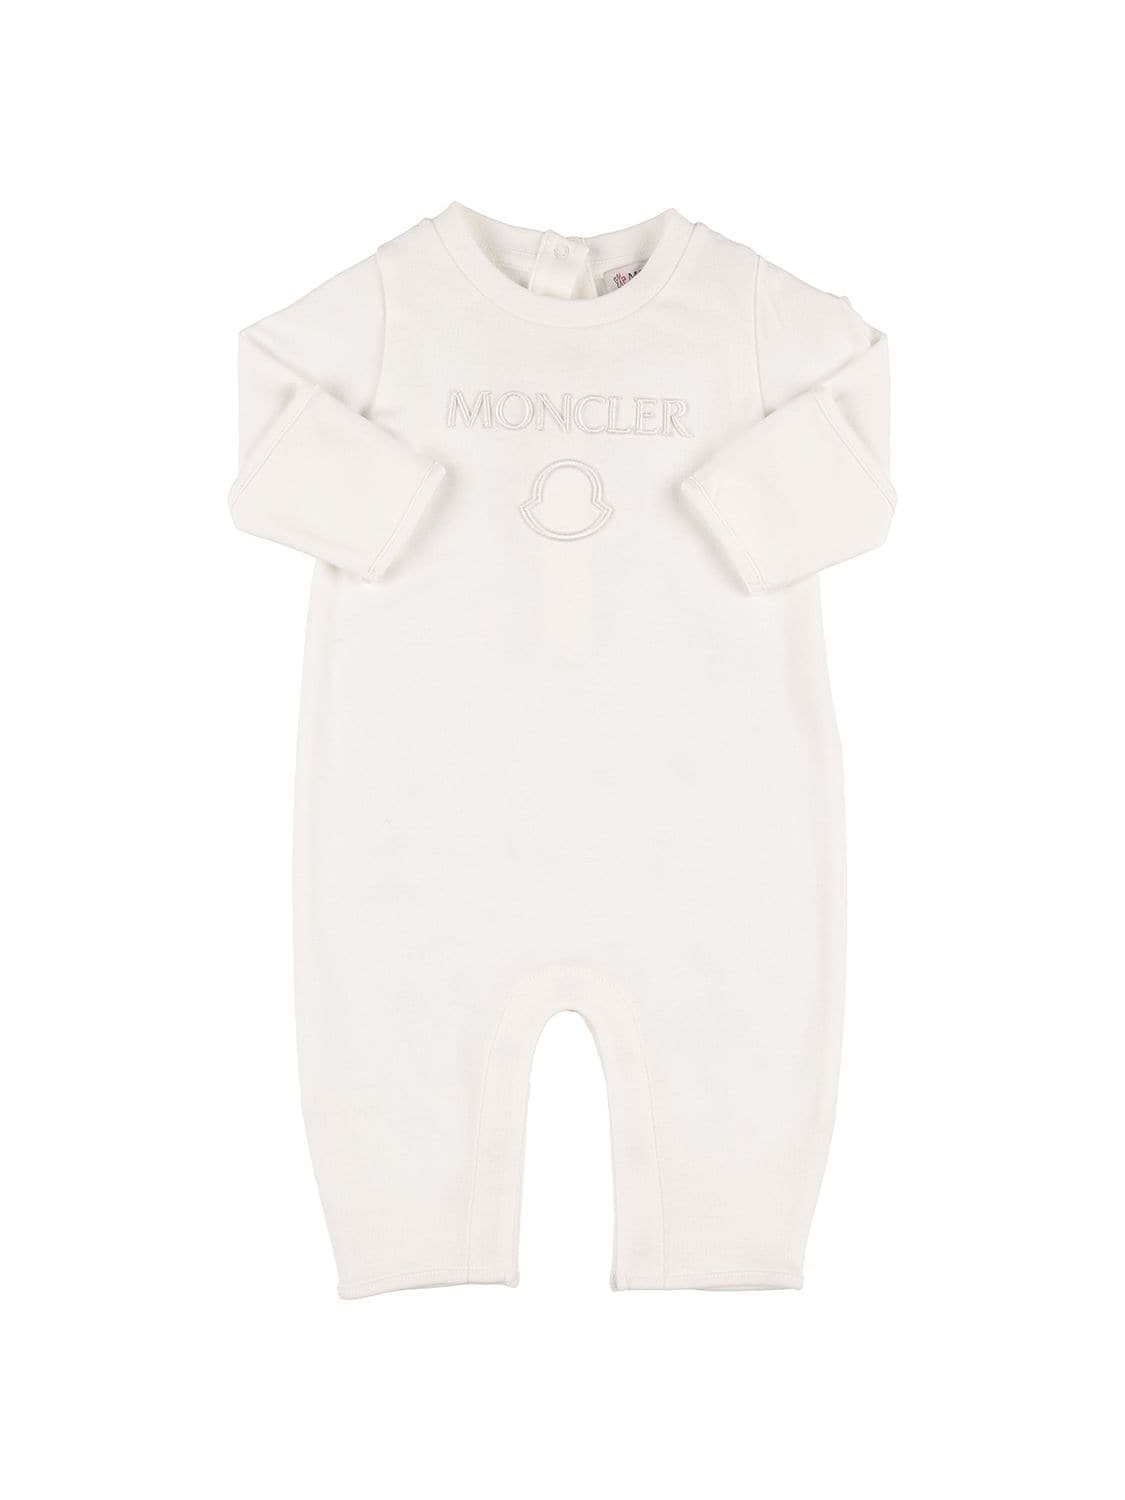 MONCLER LOGO EMBROIDERED COTTON ROMPER